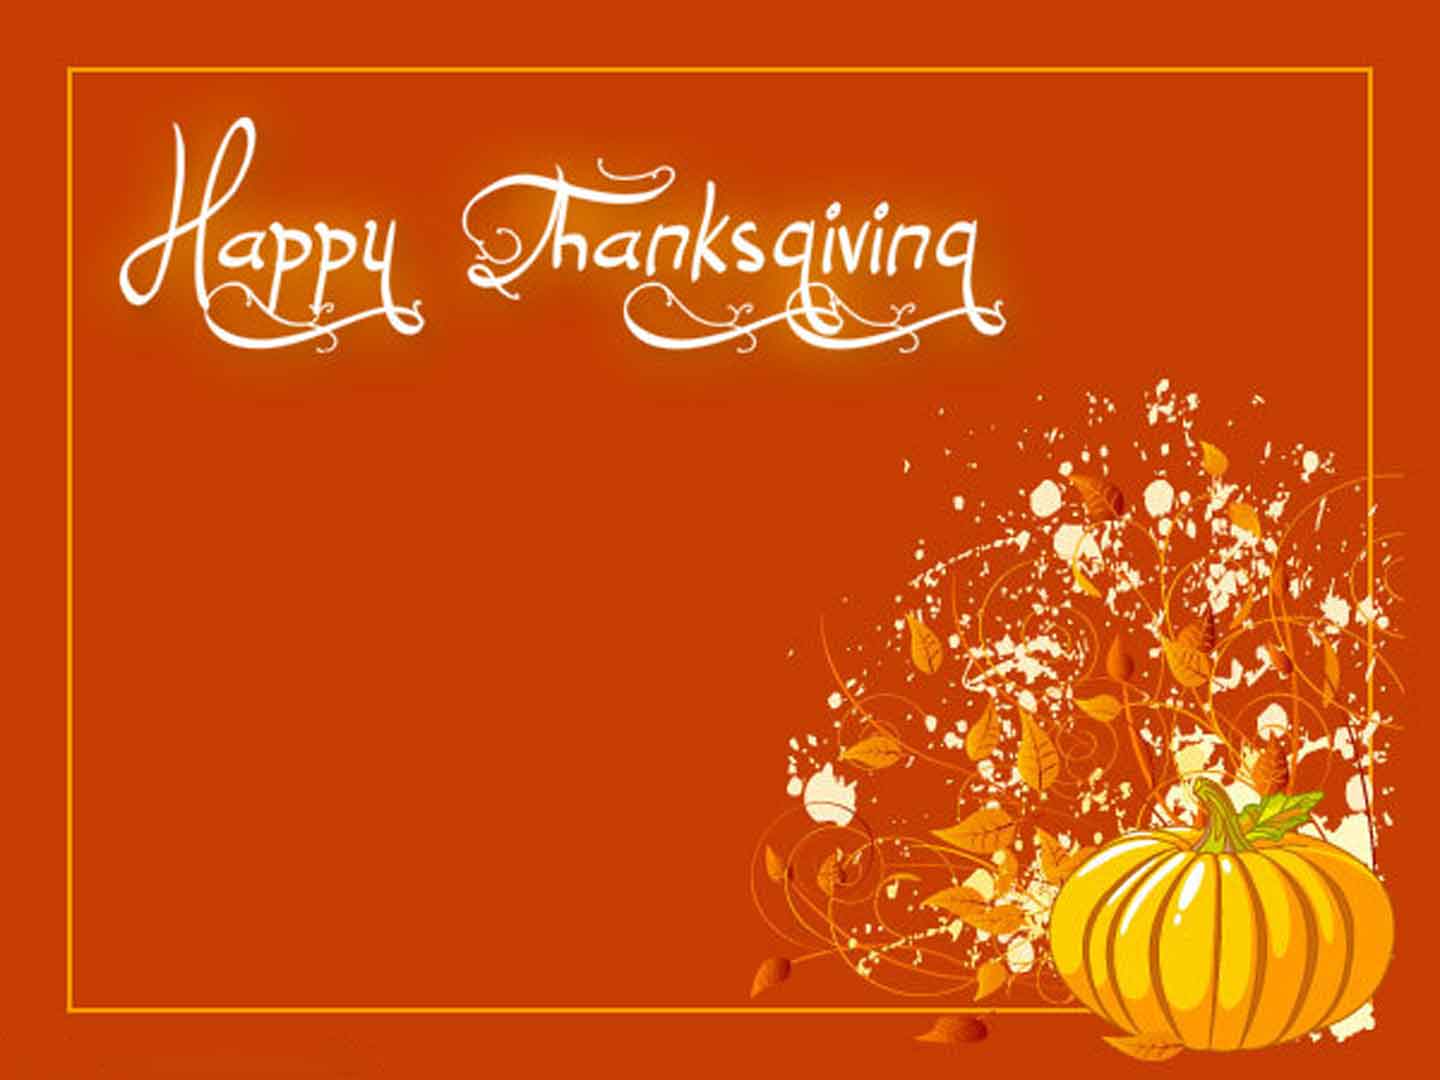 Thanksgiving Background Image, Wallpaper HD Picture